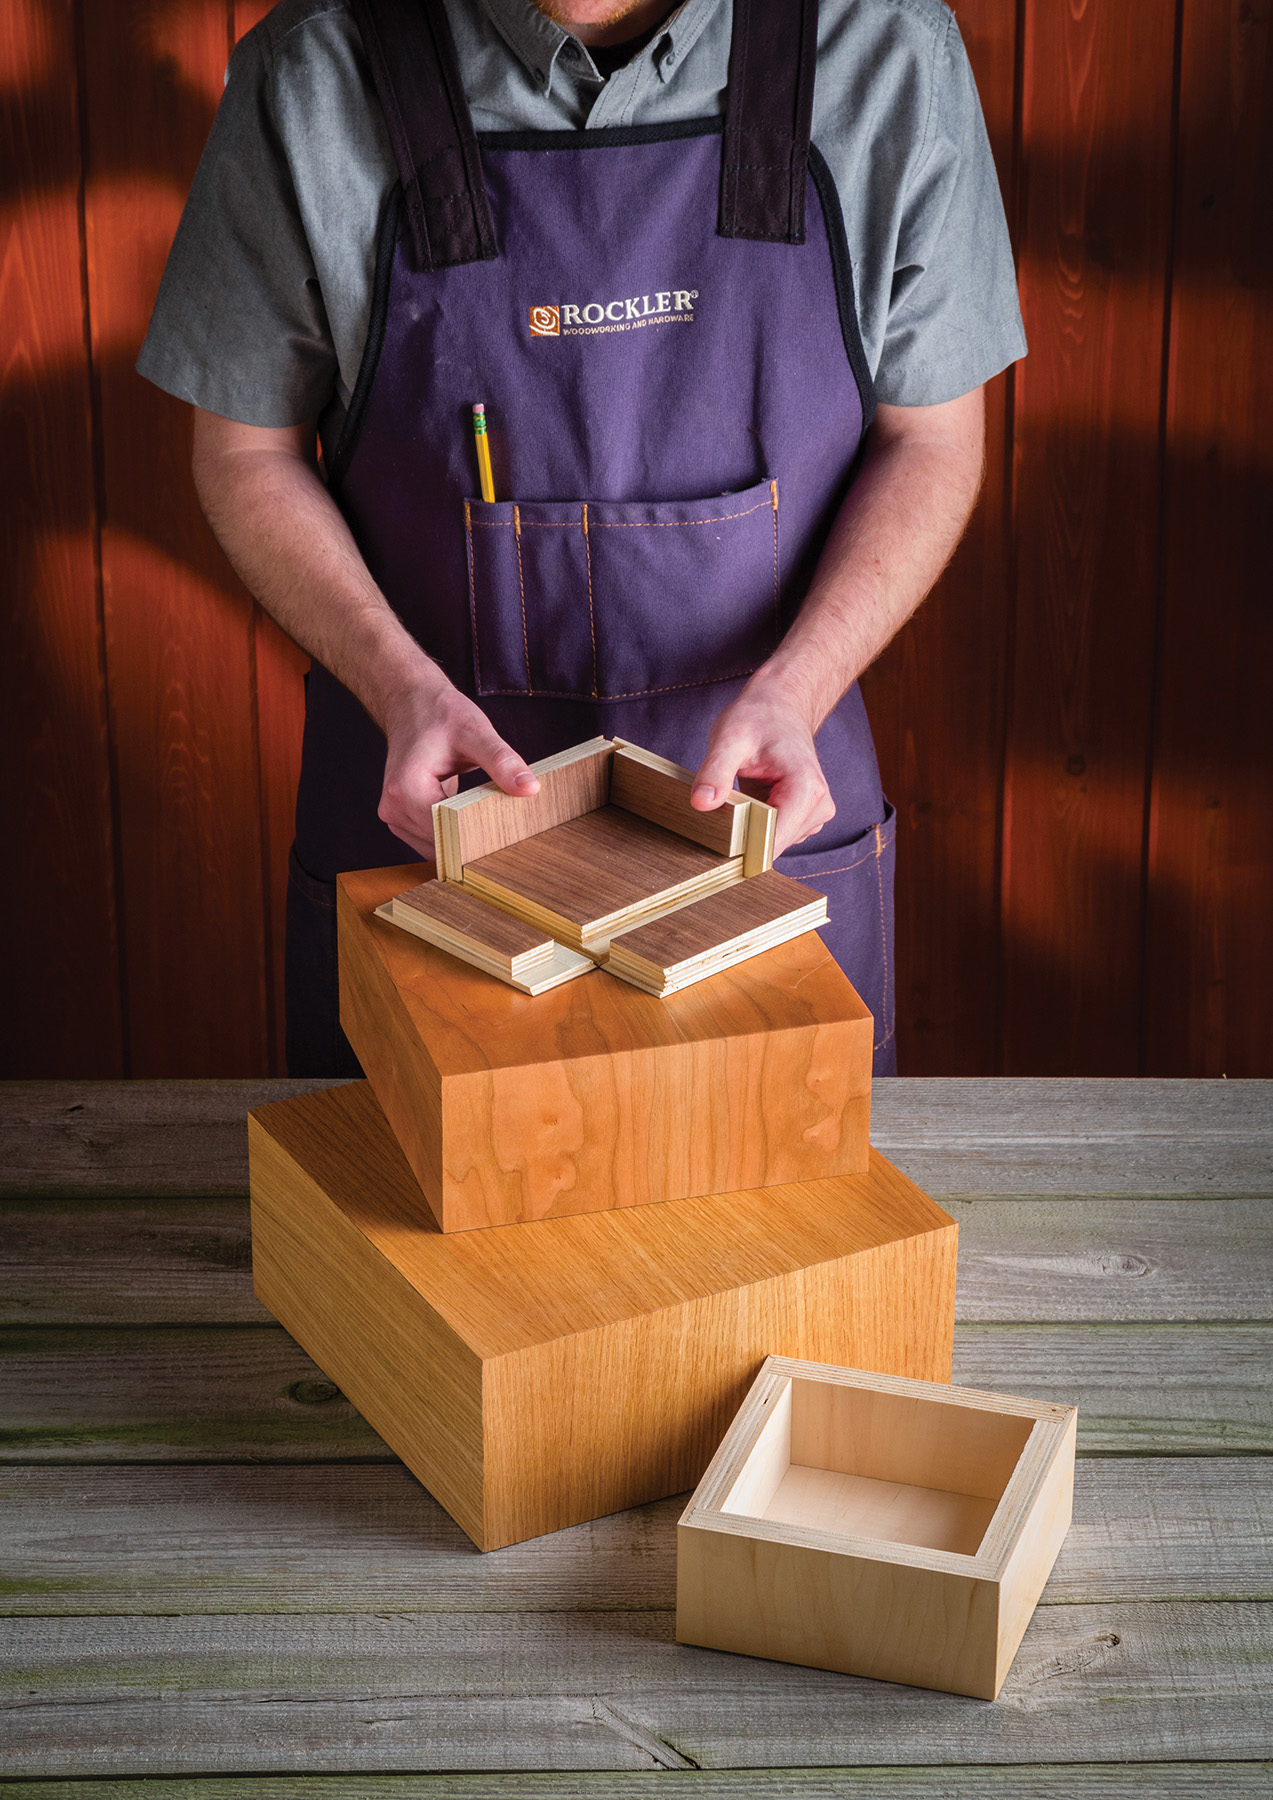 With the Rockler Miter Fold Dado Set One, users can create one box from a single sheet of material, perfectly matching the grain, at all four edges.